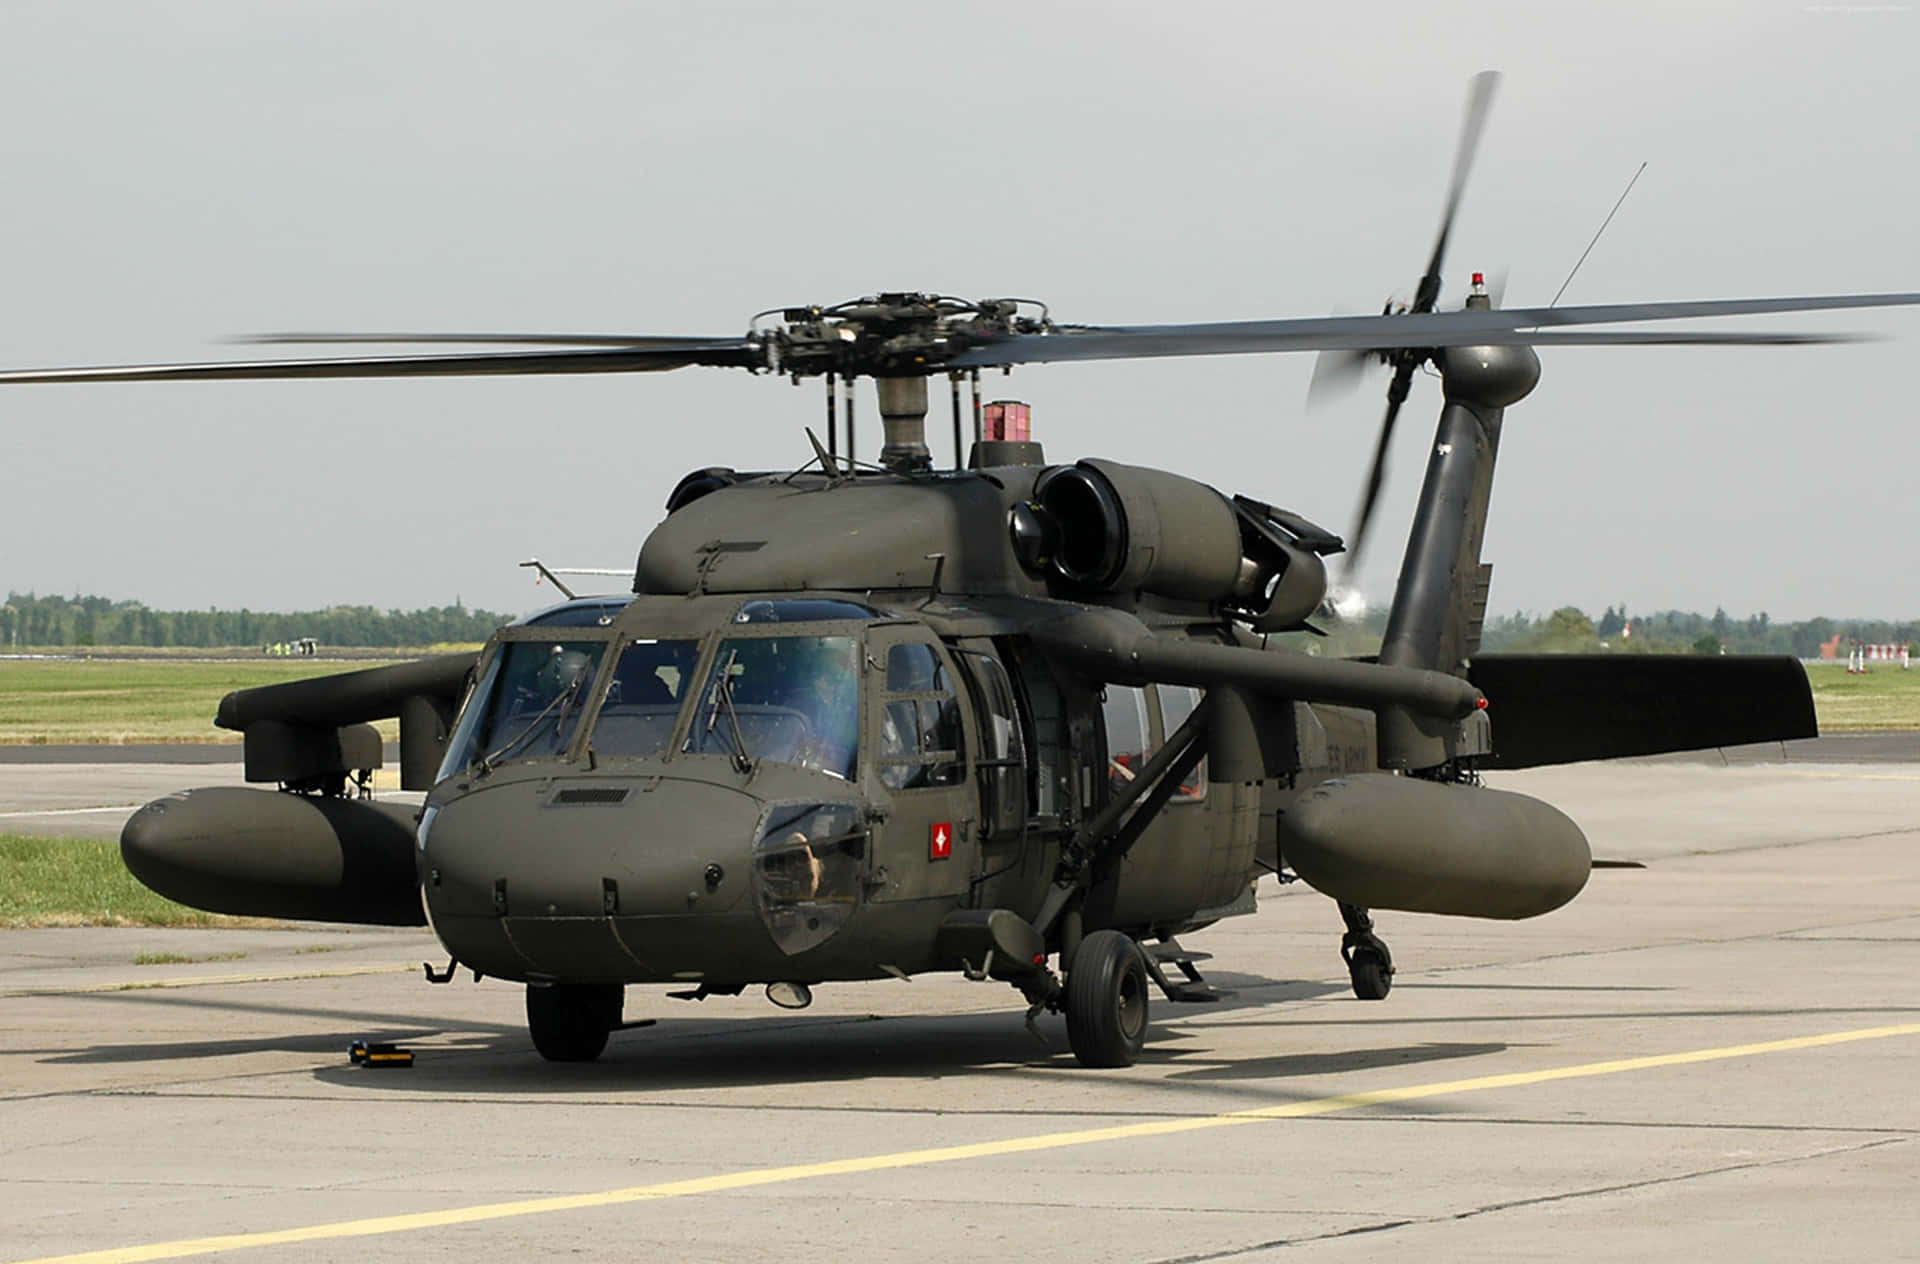 A Black Helicopter